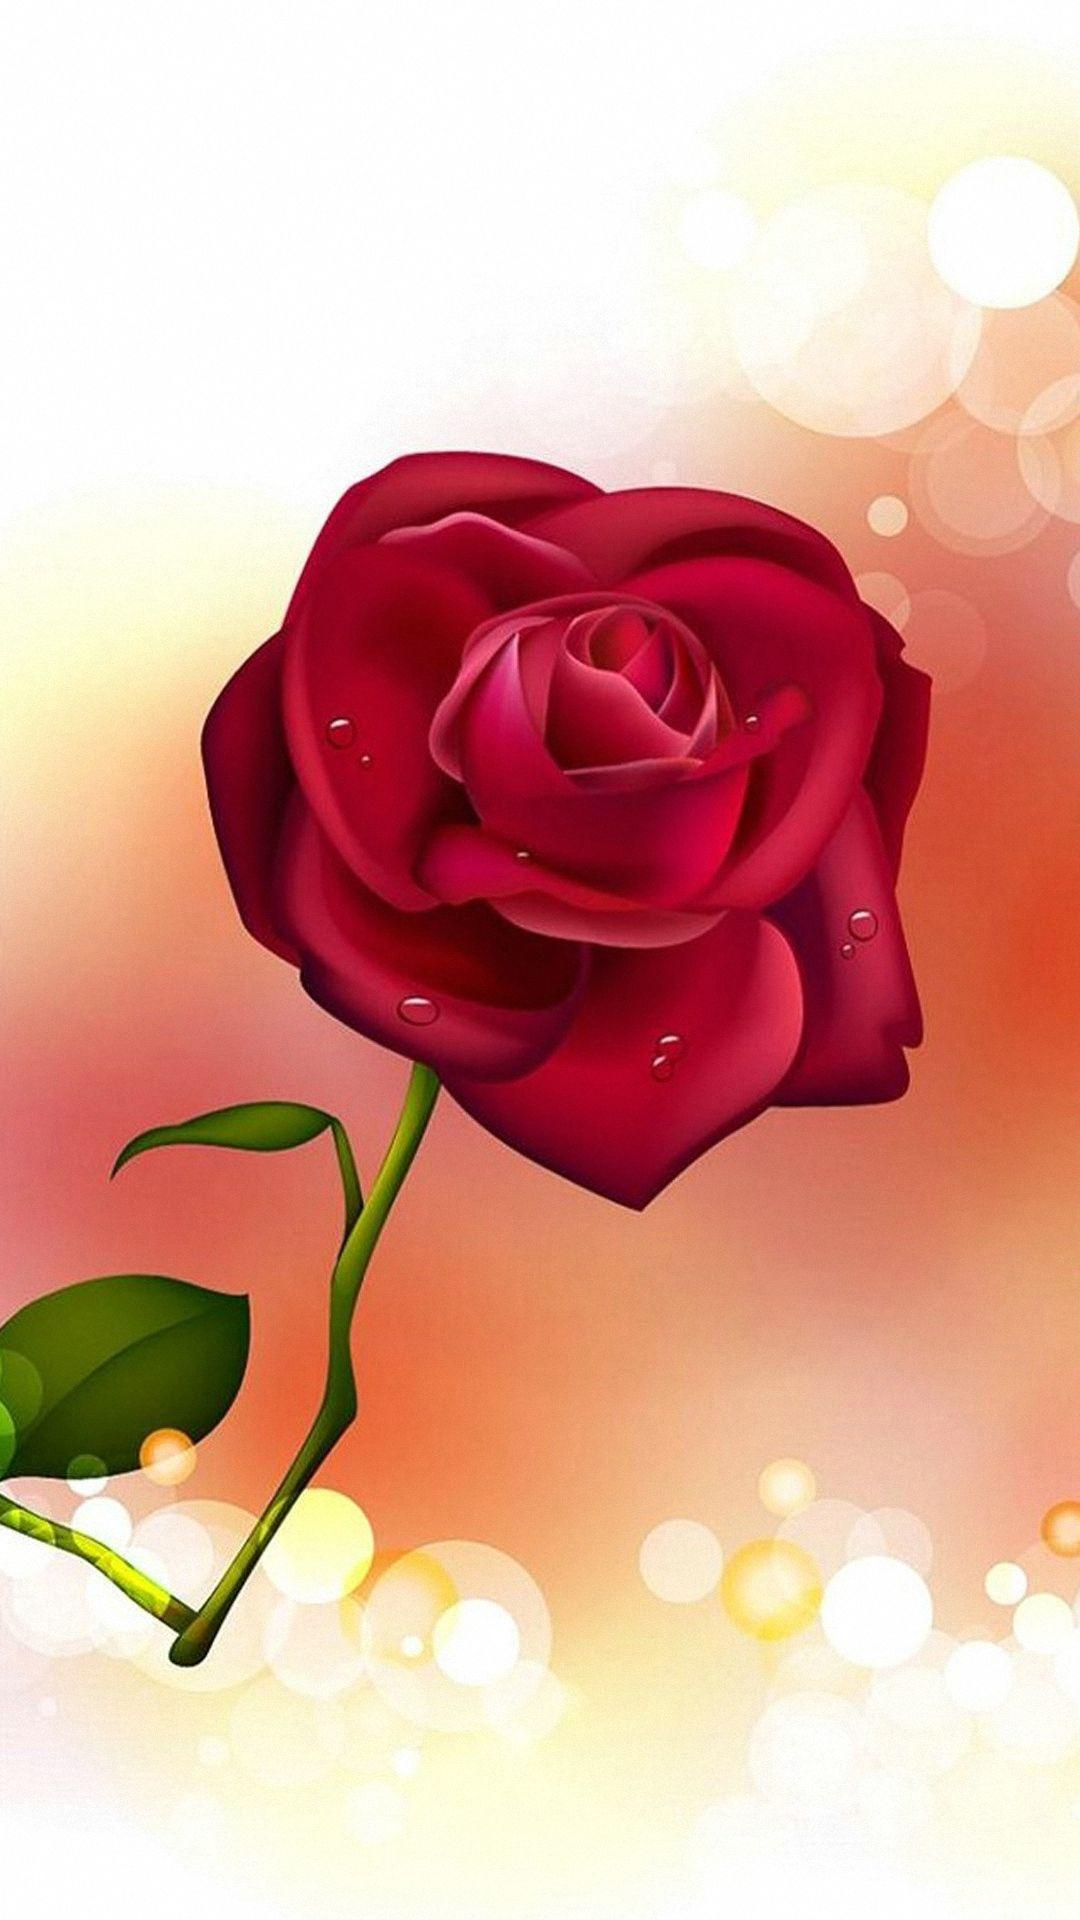 Rose Mobile Wallpapers - Top Free Rose Mobile Backgrounds - WallpaperAccess